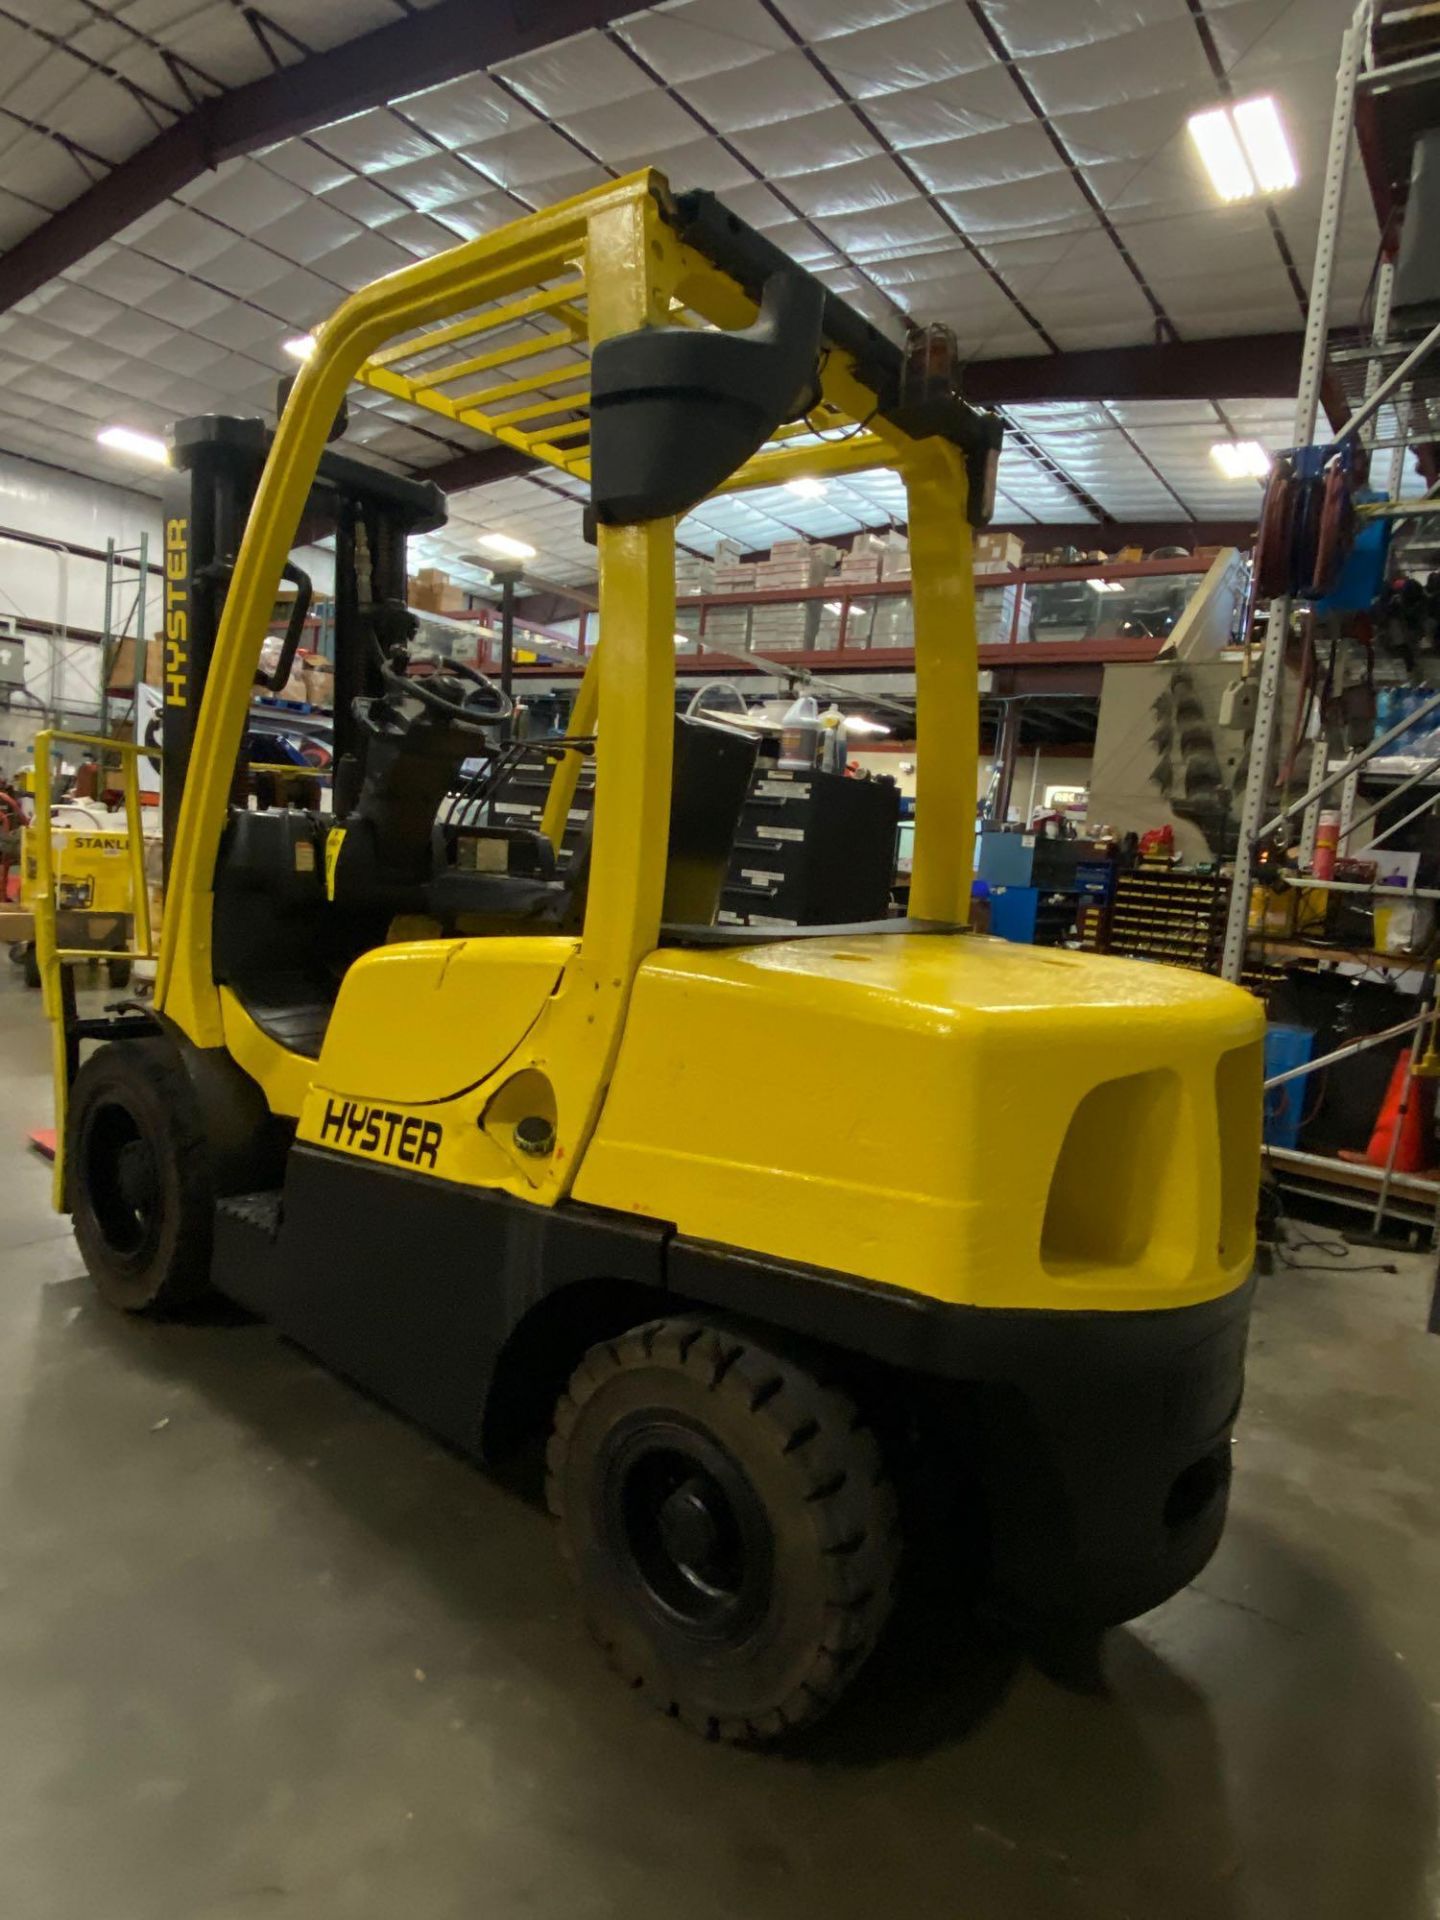 HYSTER H70FT FORKLIFT, APPROX. 7,000 LB CAPACITY, 181.9" HEIGHT CAP, TILT, RUNS AND OPERATES - Image 2 of 10